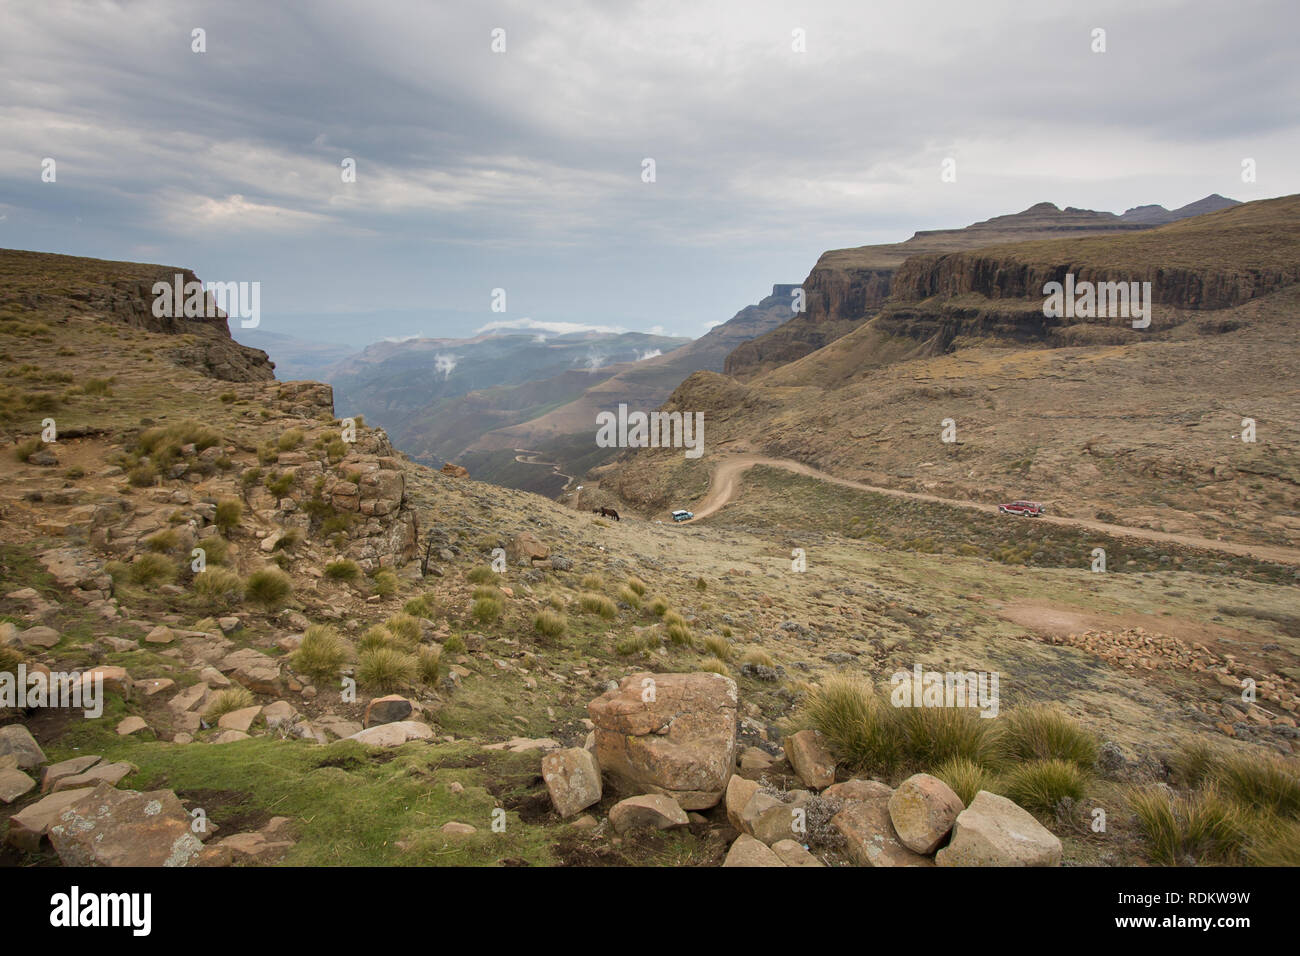 Sani Pass is a famous 4x4 dirt road that conects KwaZulu-Natal in South Africa to Thaba-Tseka in Lesotho. South Arican border control is at the bottom. Stock Photo